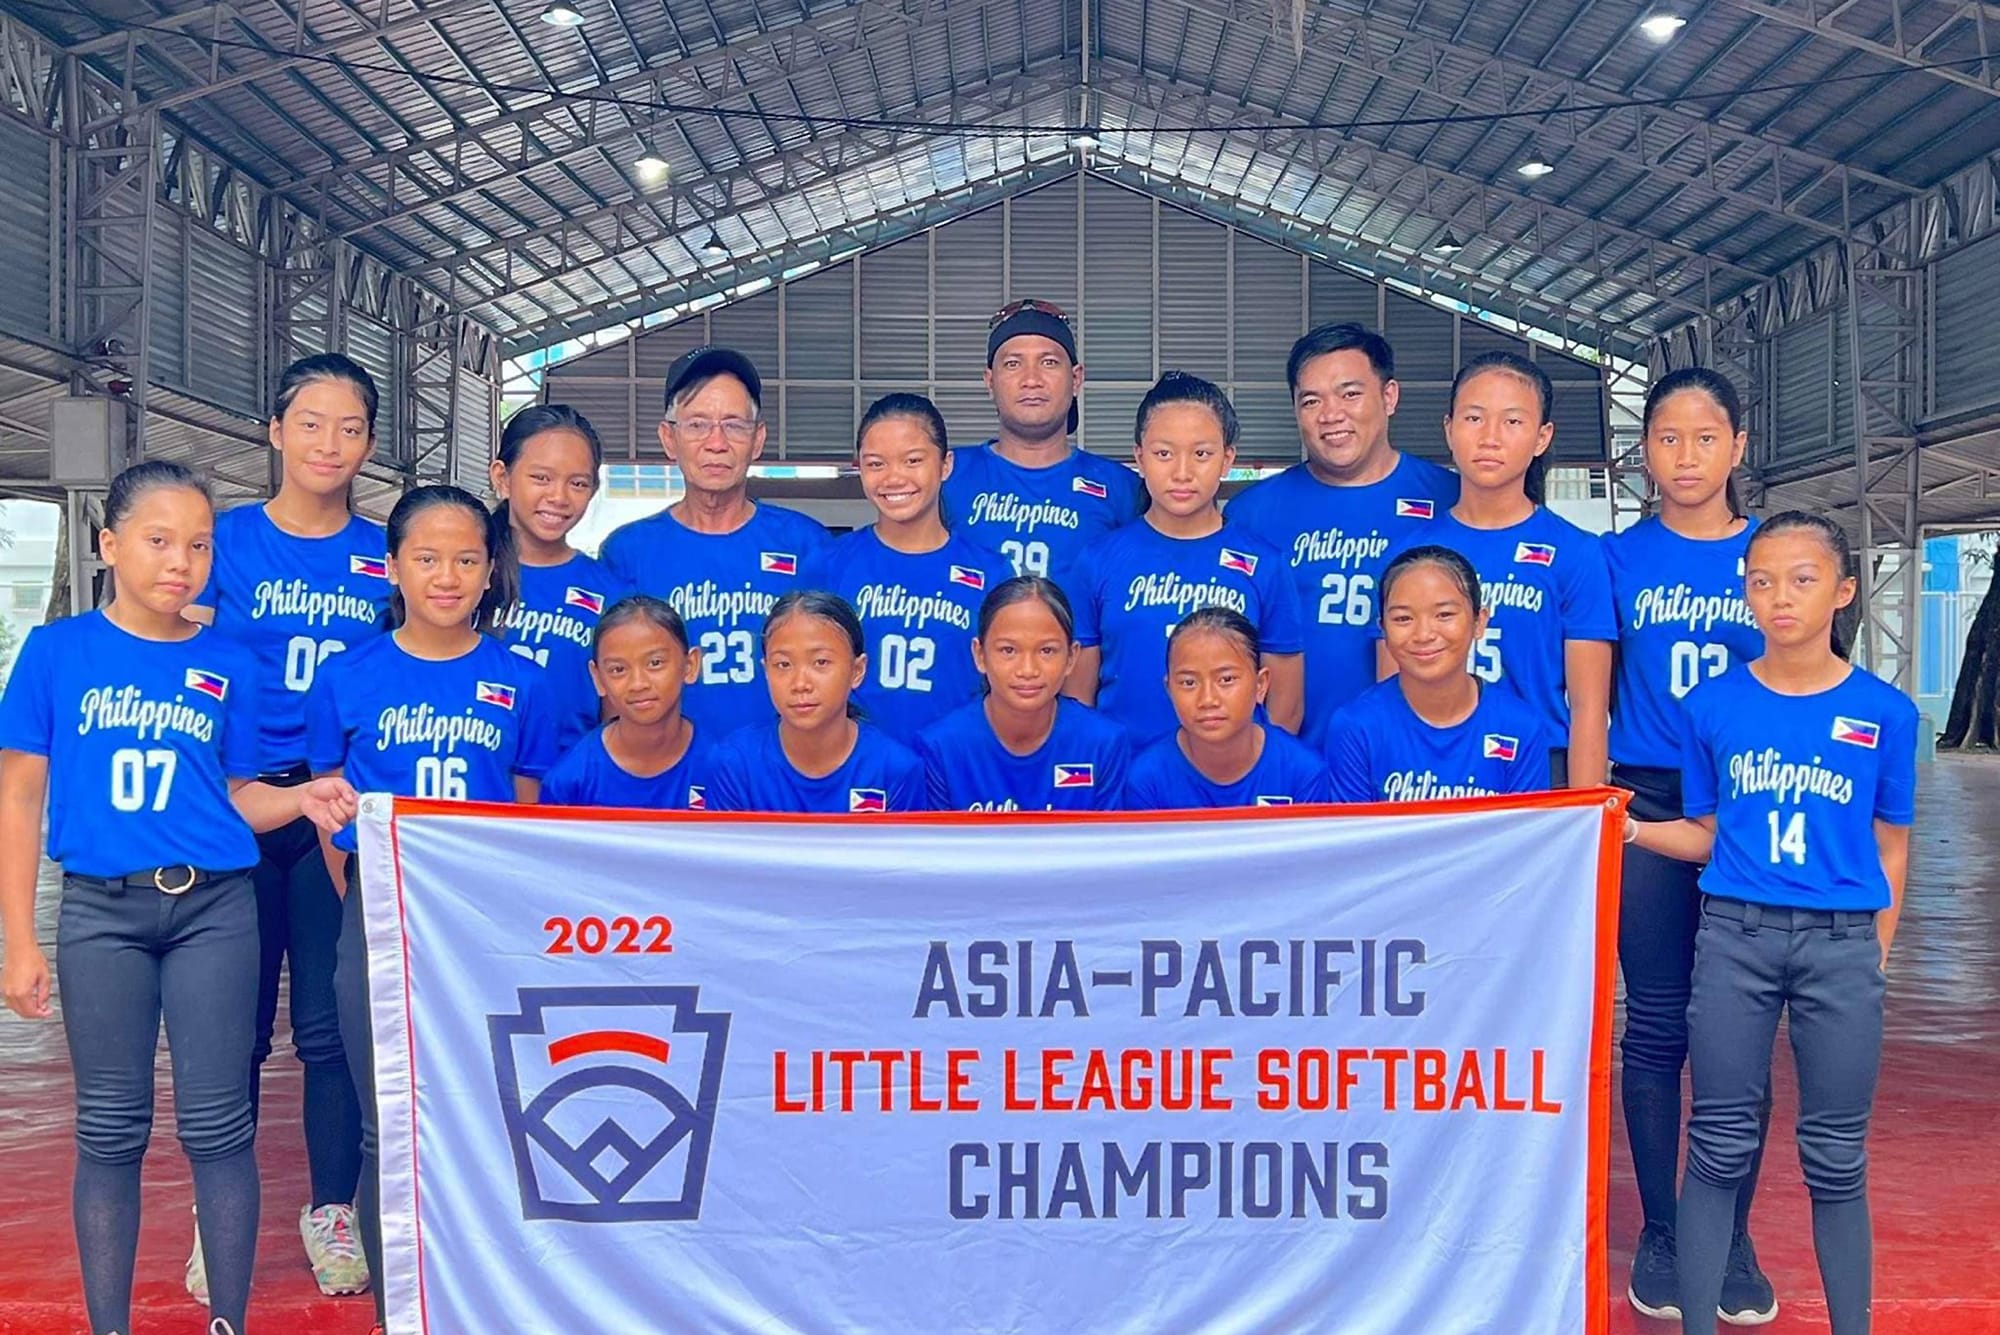 Philippines 2022 LLS Asia-Pacific Region Champs